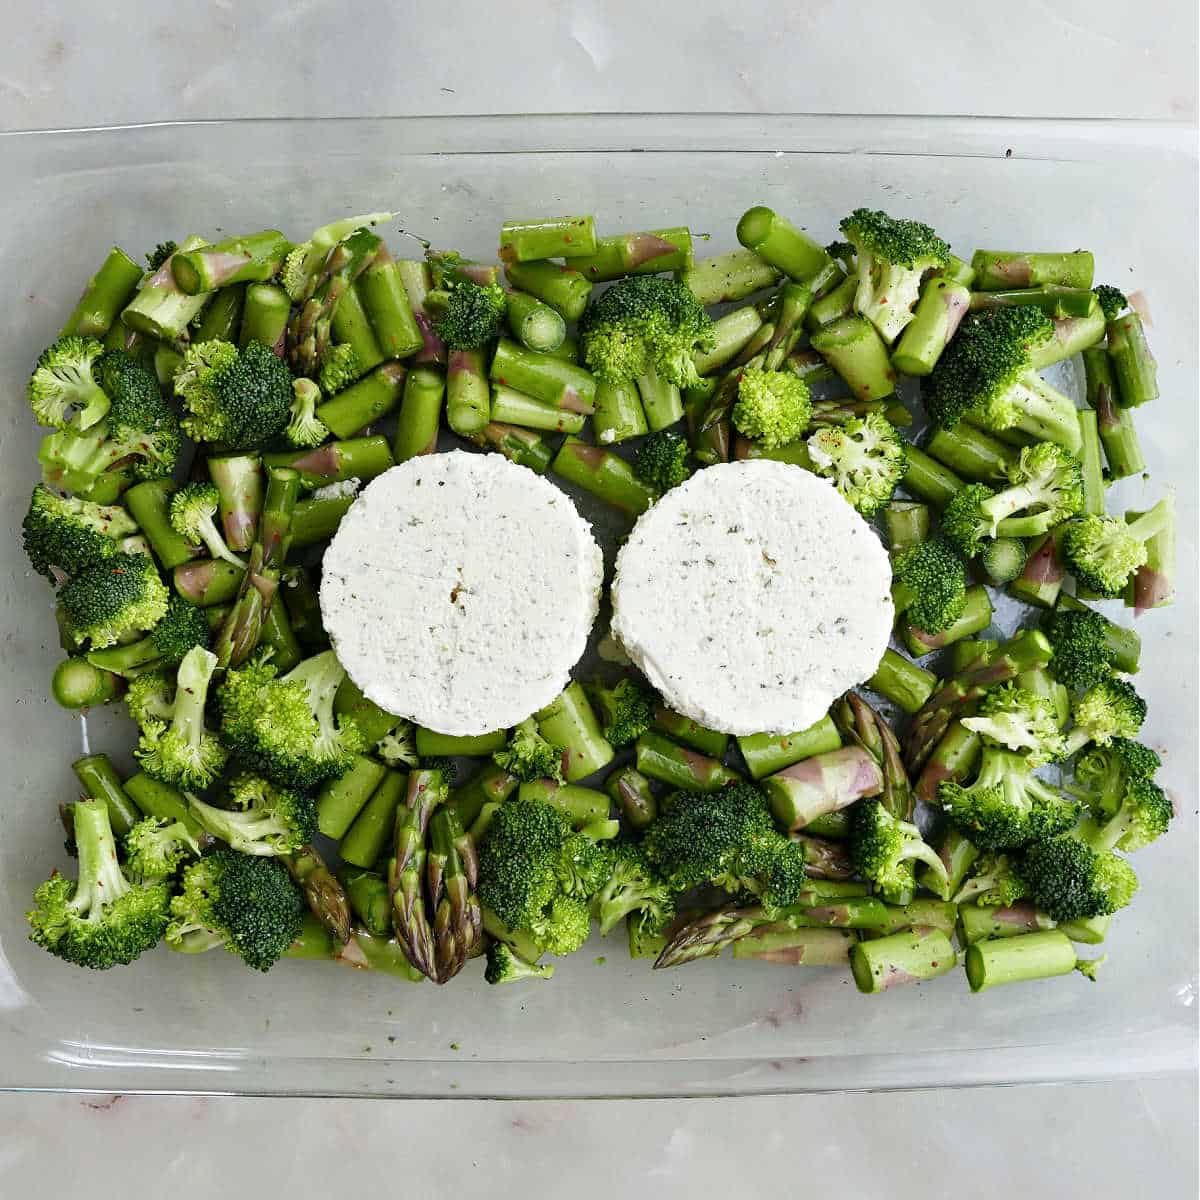 Broccoli and asparagus in a large glass baking dish topped with two wheels of cheese.